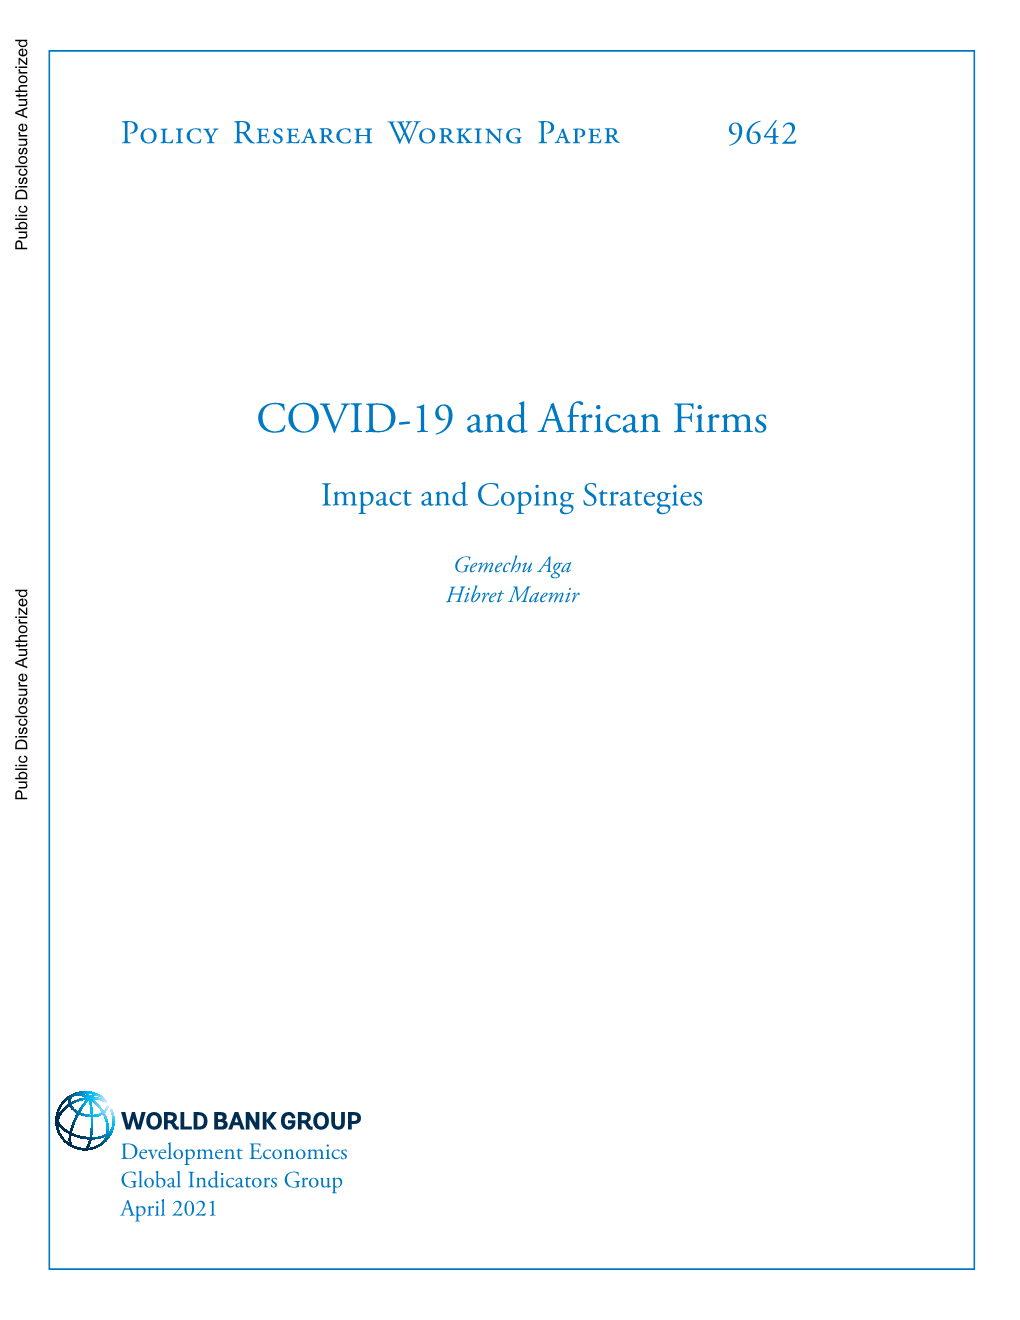 COVID-19 and African Firms: Impact and Coping Strategies∗